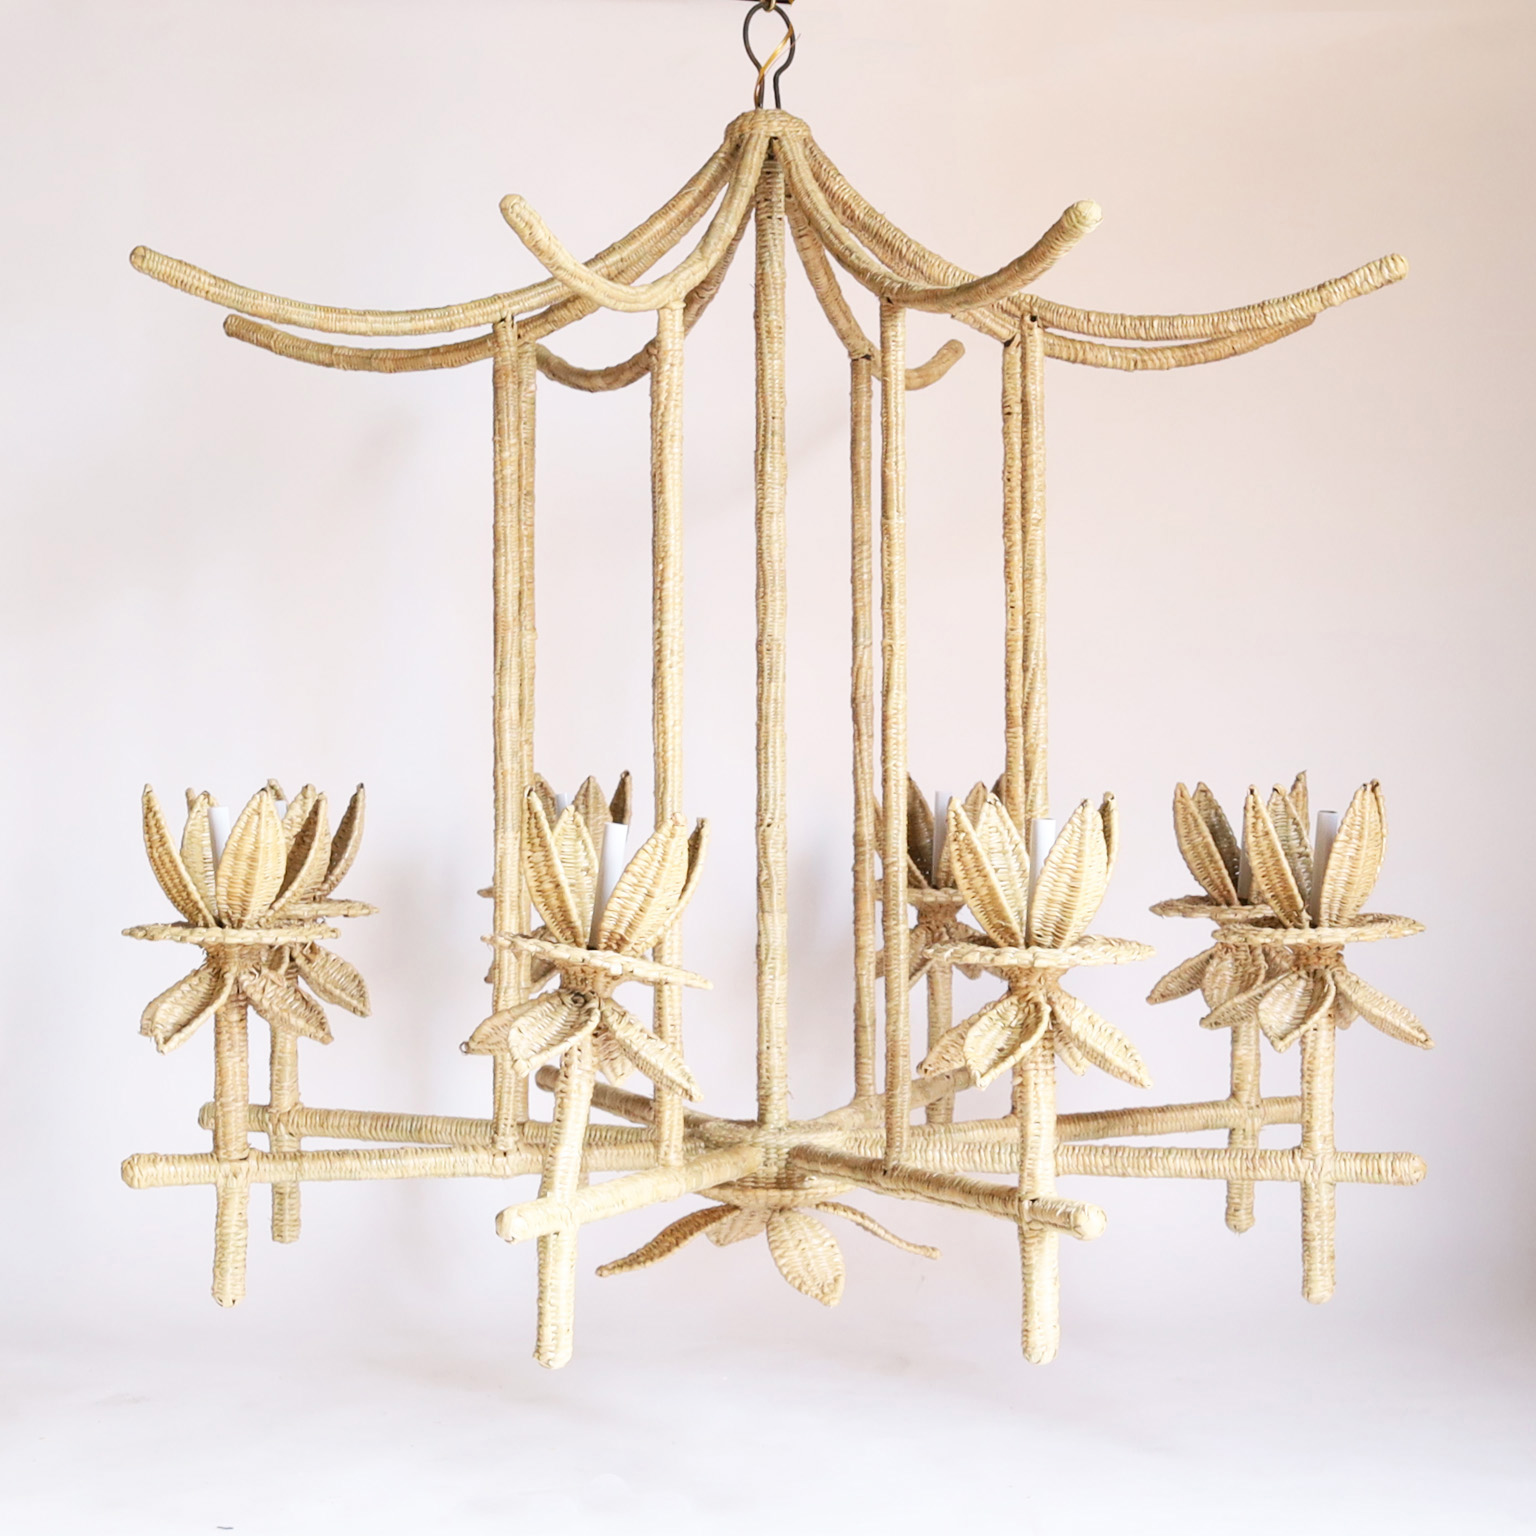 The Seychelles Woven Reed Pagoda Form Chandelier or Light Fixture from the FS Flores Collection